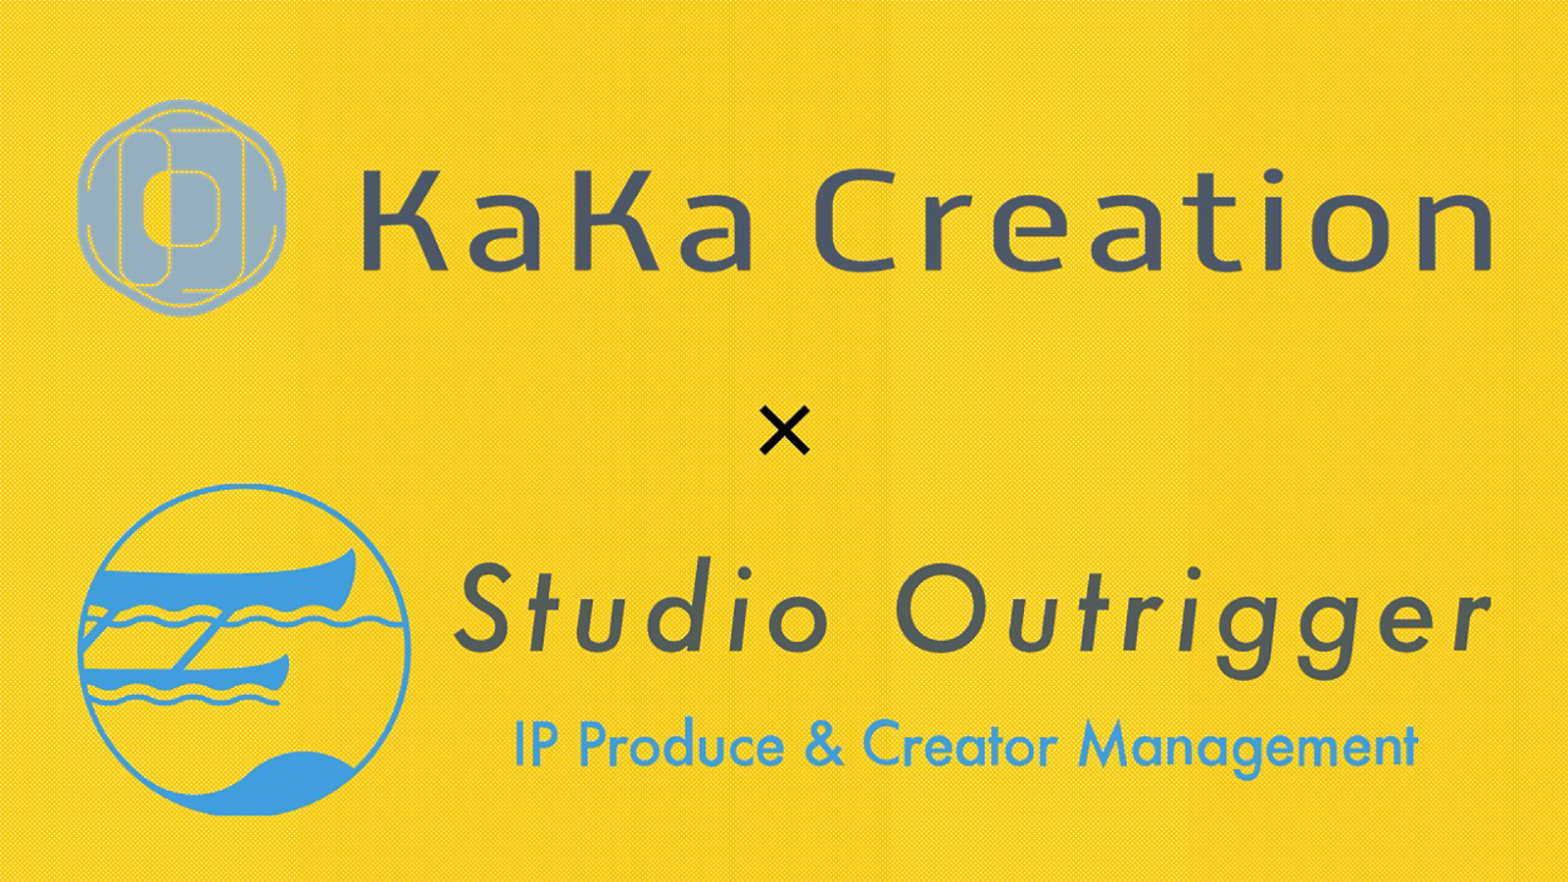 Our executive, Ray Kamiya appointed as advisor to KaKa Creation specializing in AI animation Business.